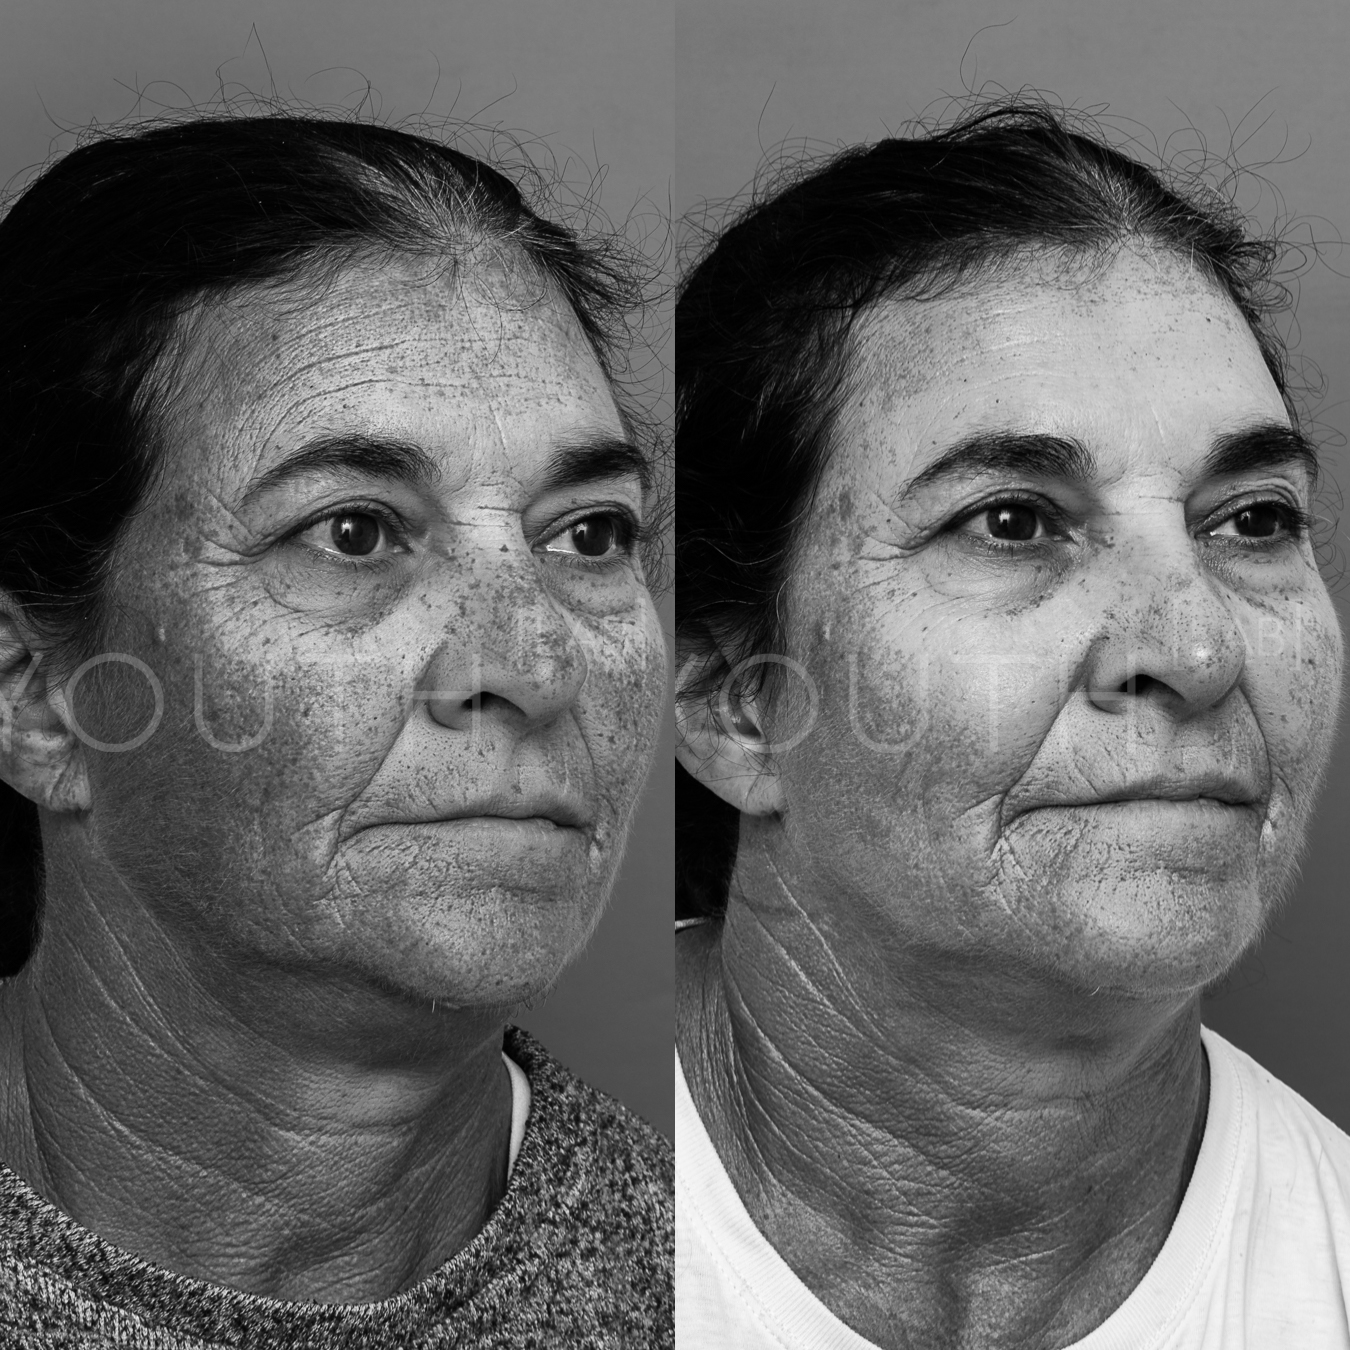 BBL Photofacial: The Big Difference with IPL – lumenessa